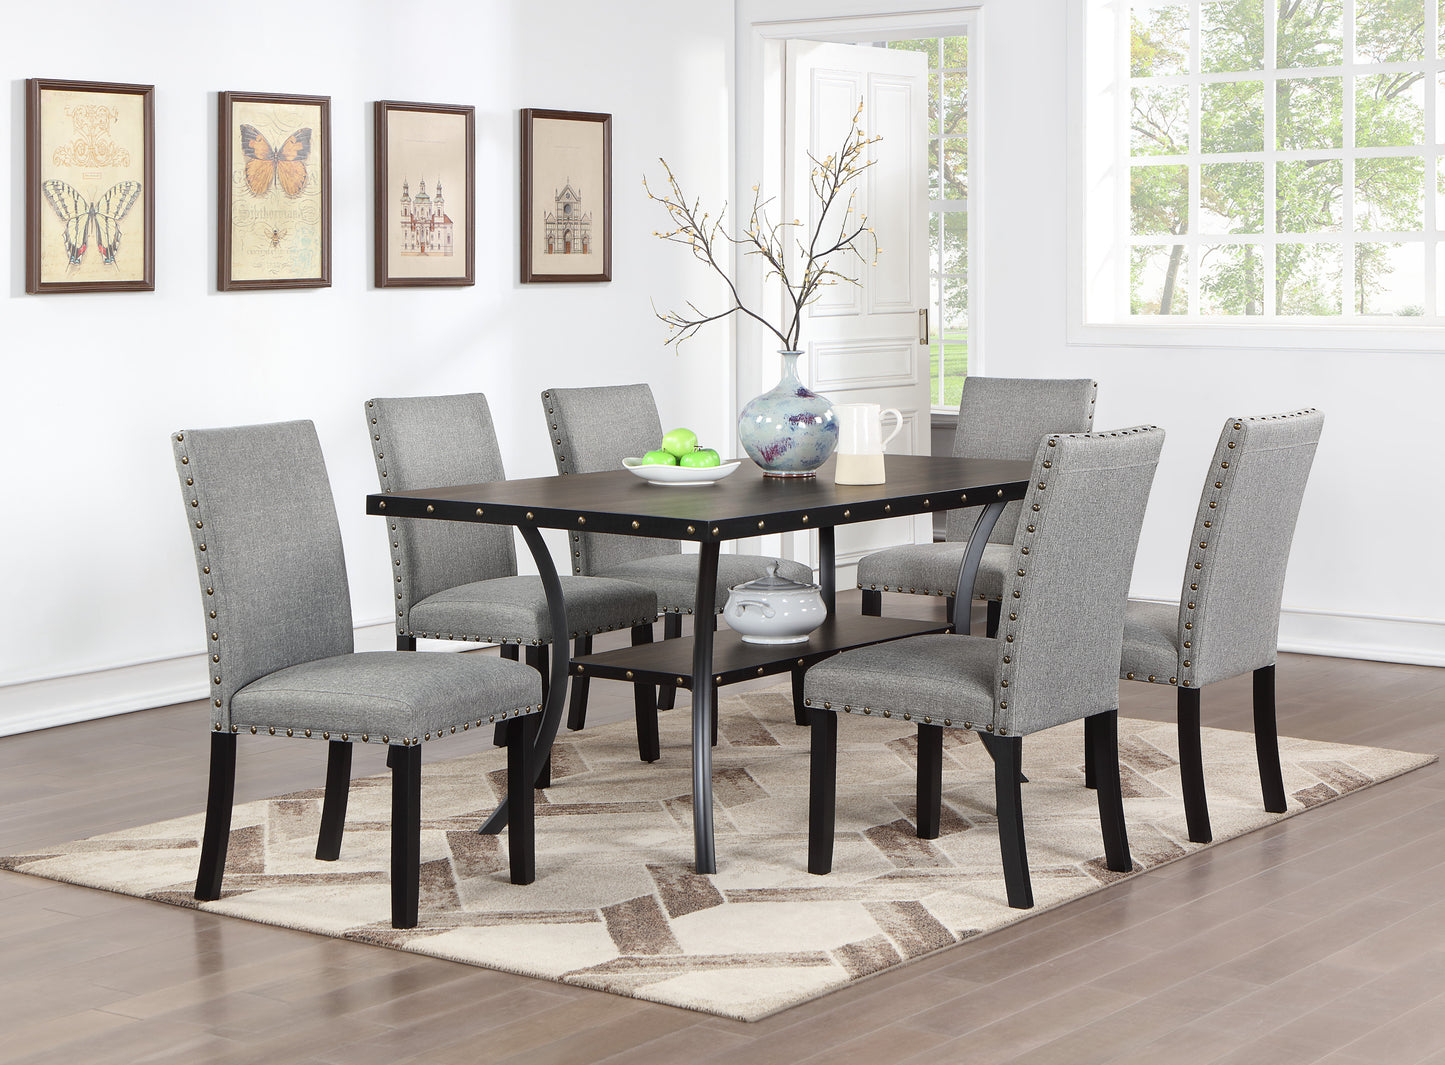 Grey Fabric Modern Set of 2 Dining Chairs Plush Cushion Side Chairs Nailheads Trim Wooden Chair Kitchen Dining Room